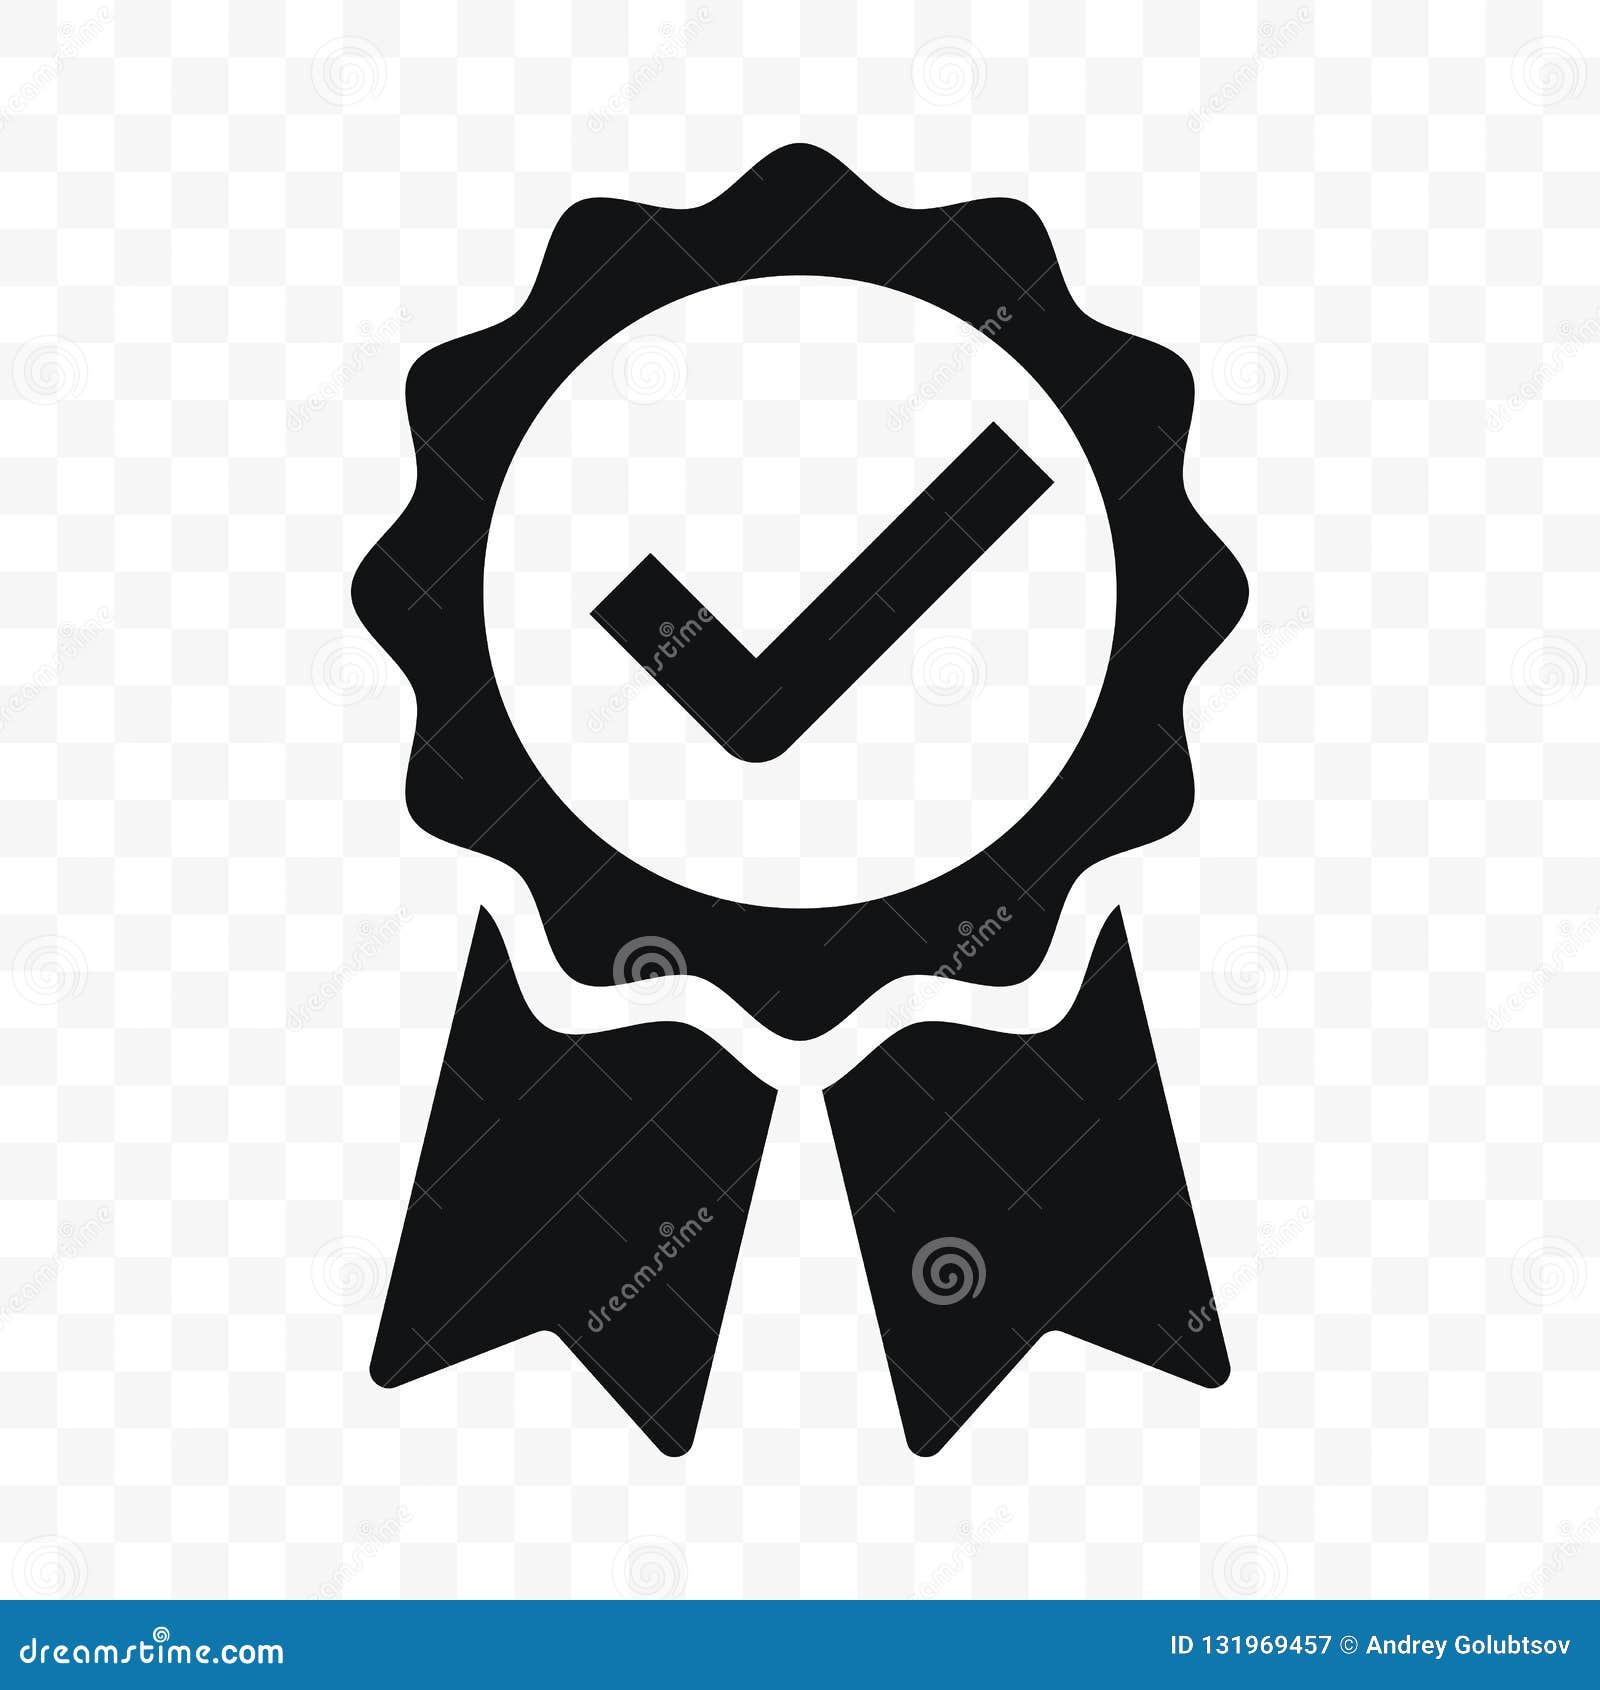 quality icon certified check mark ribbon label.  premium product certified or best choice recommended award and warranty